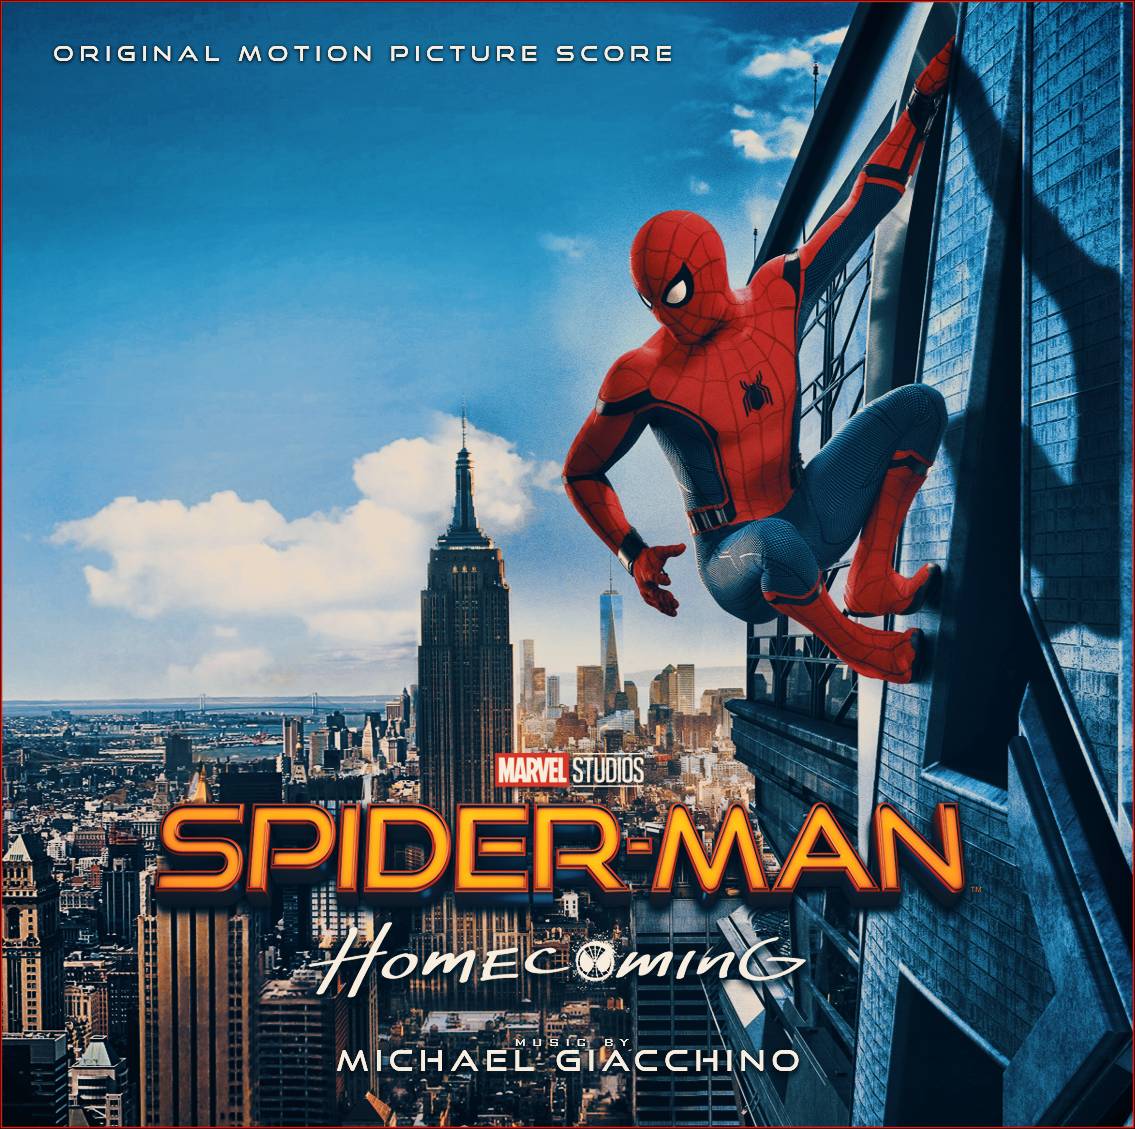 Spider-Man: Homecoming OST (Custom AW) by JT00567 on DeviantArt